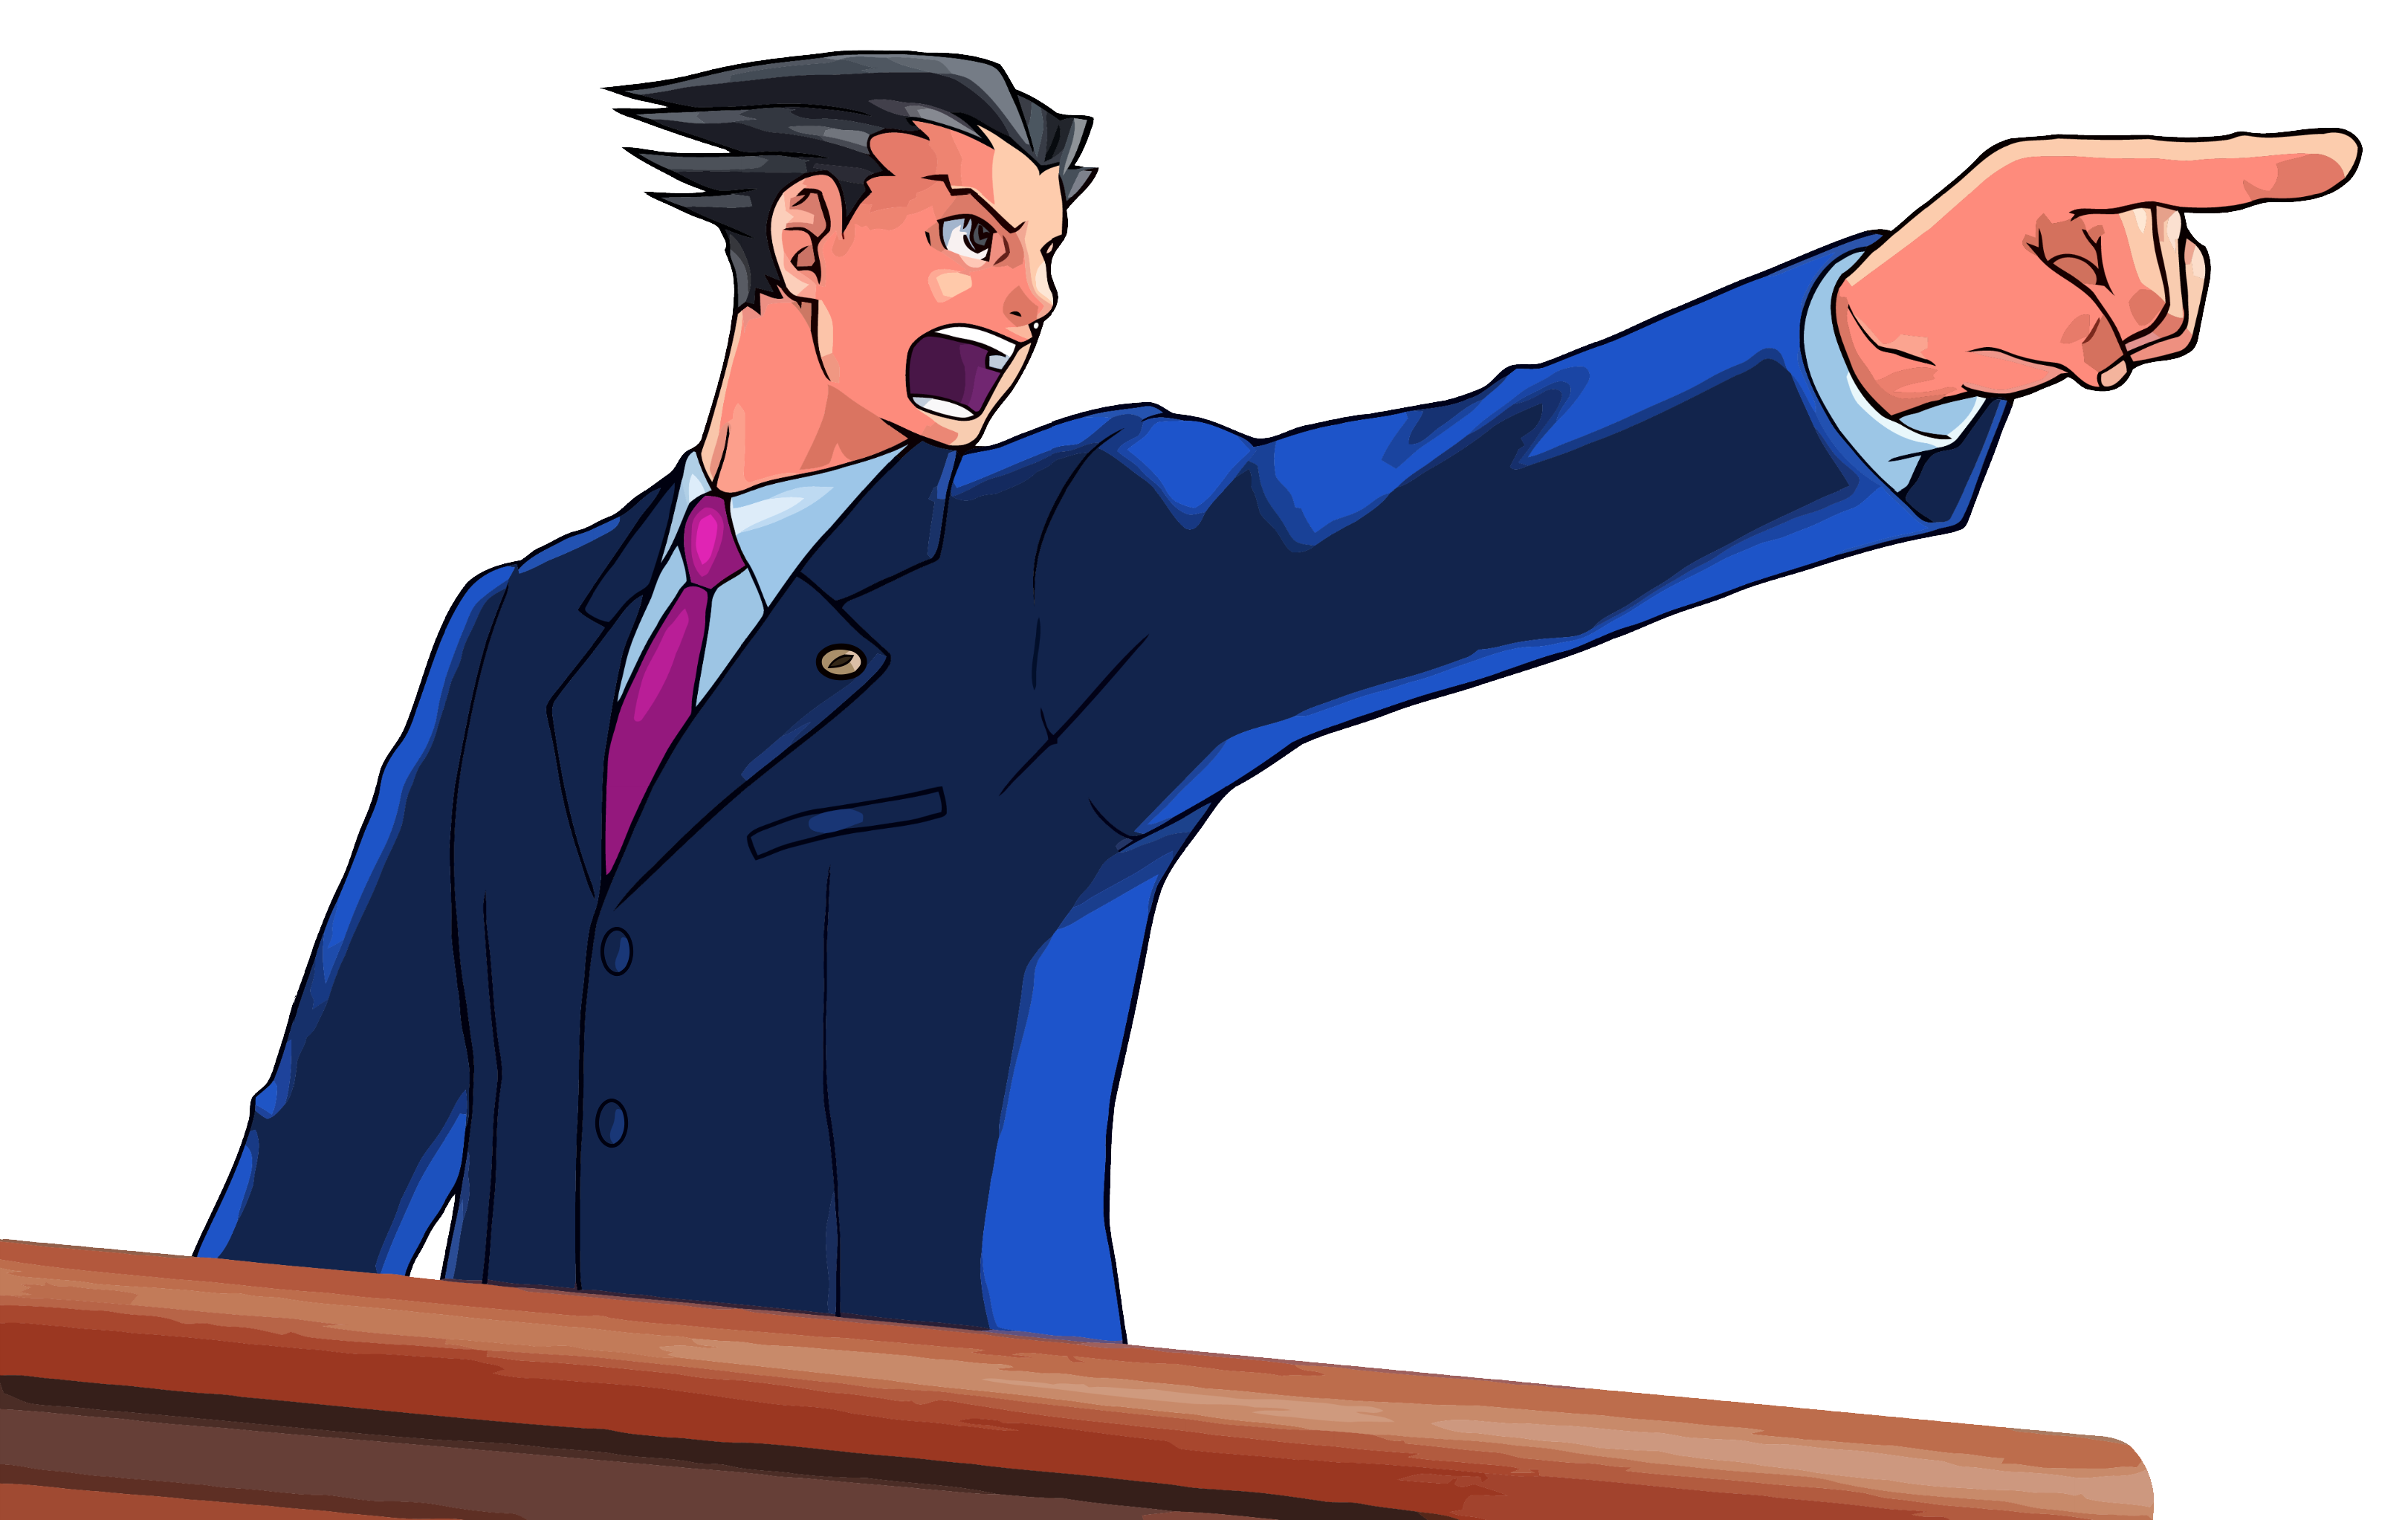 Download Ace Attorney Png Image HQ PNG Image FreePNGImg.